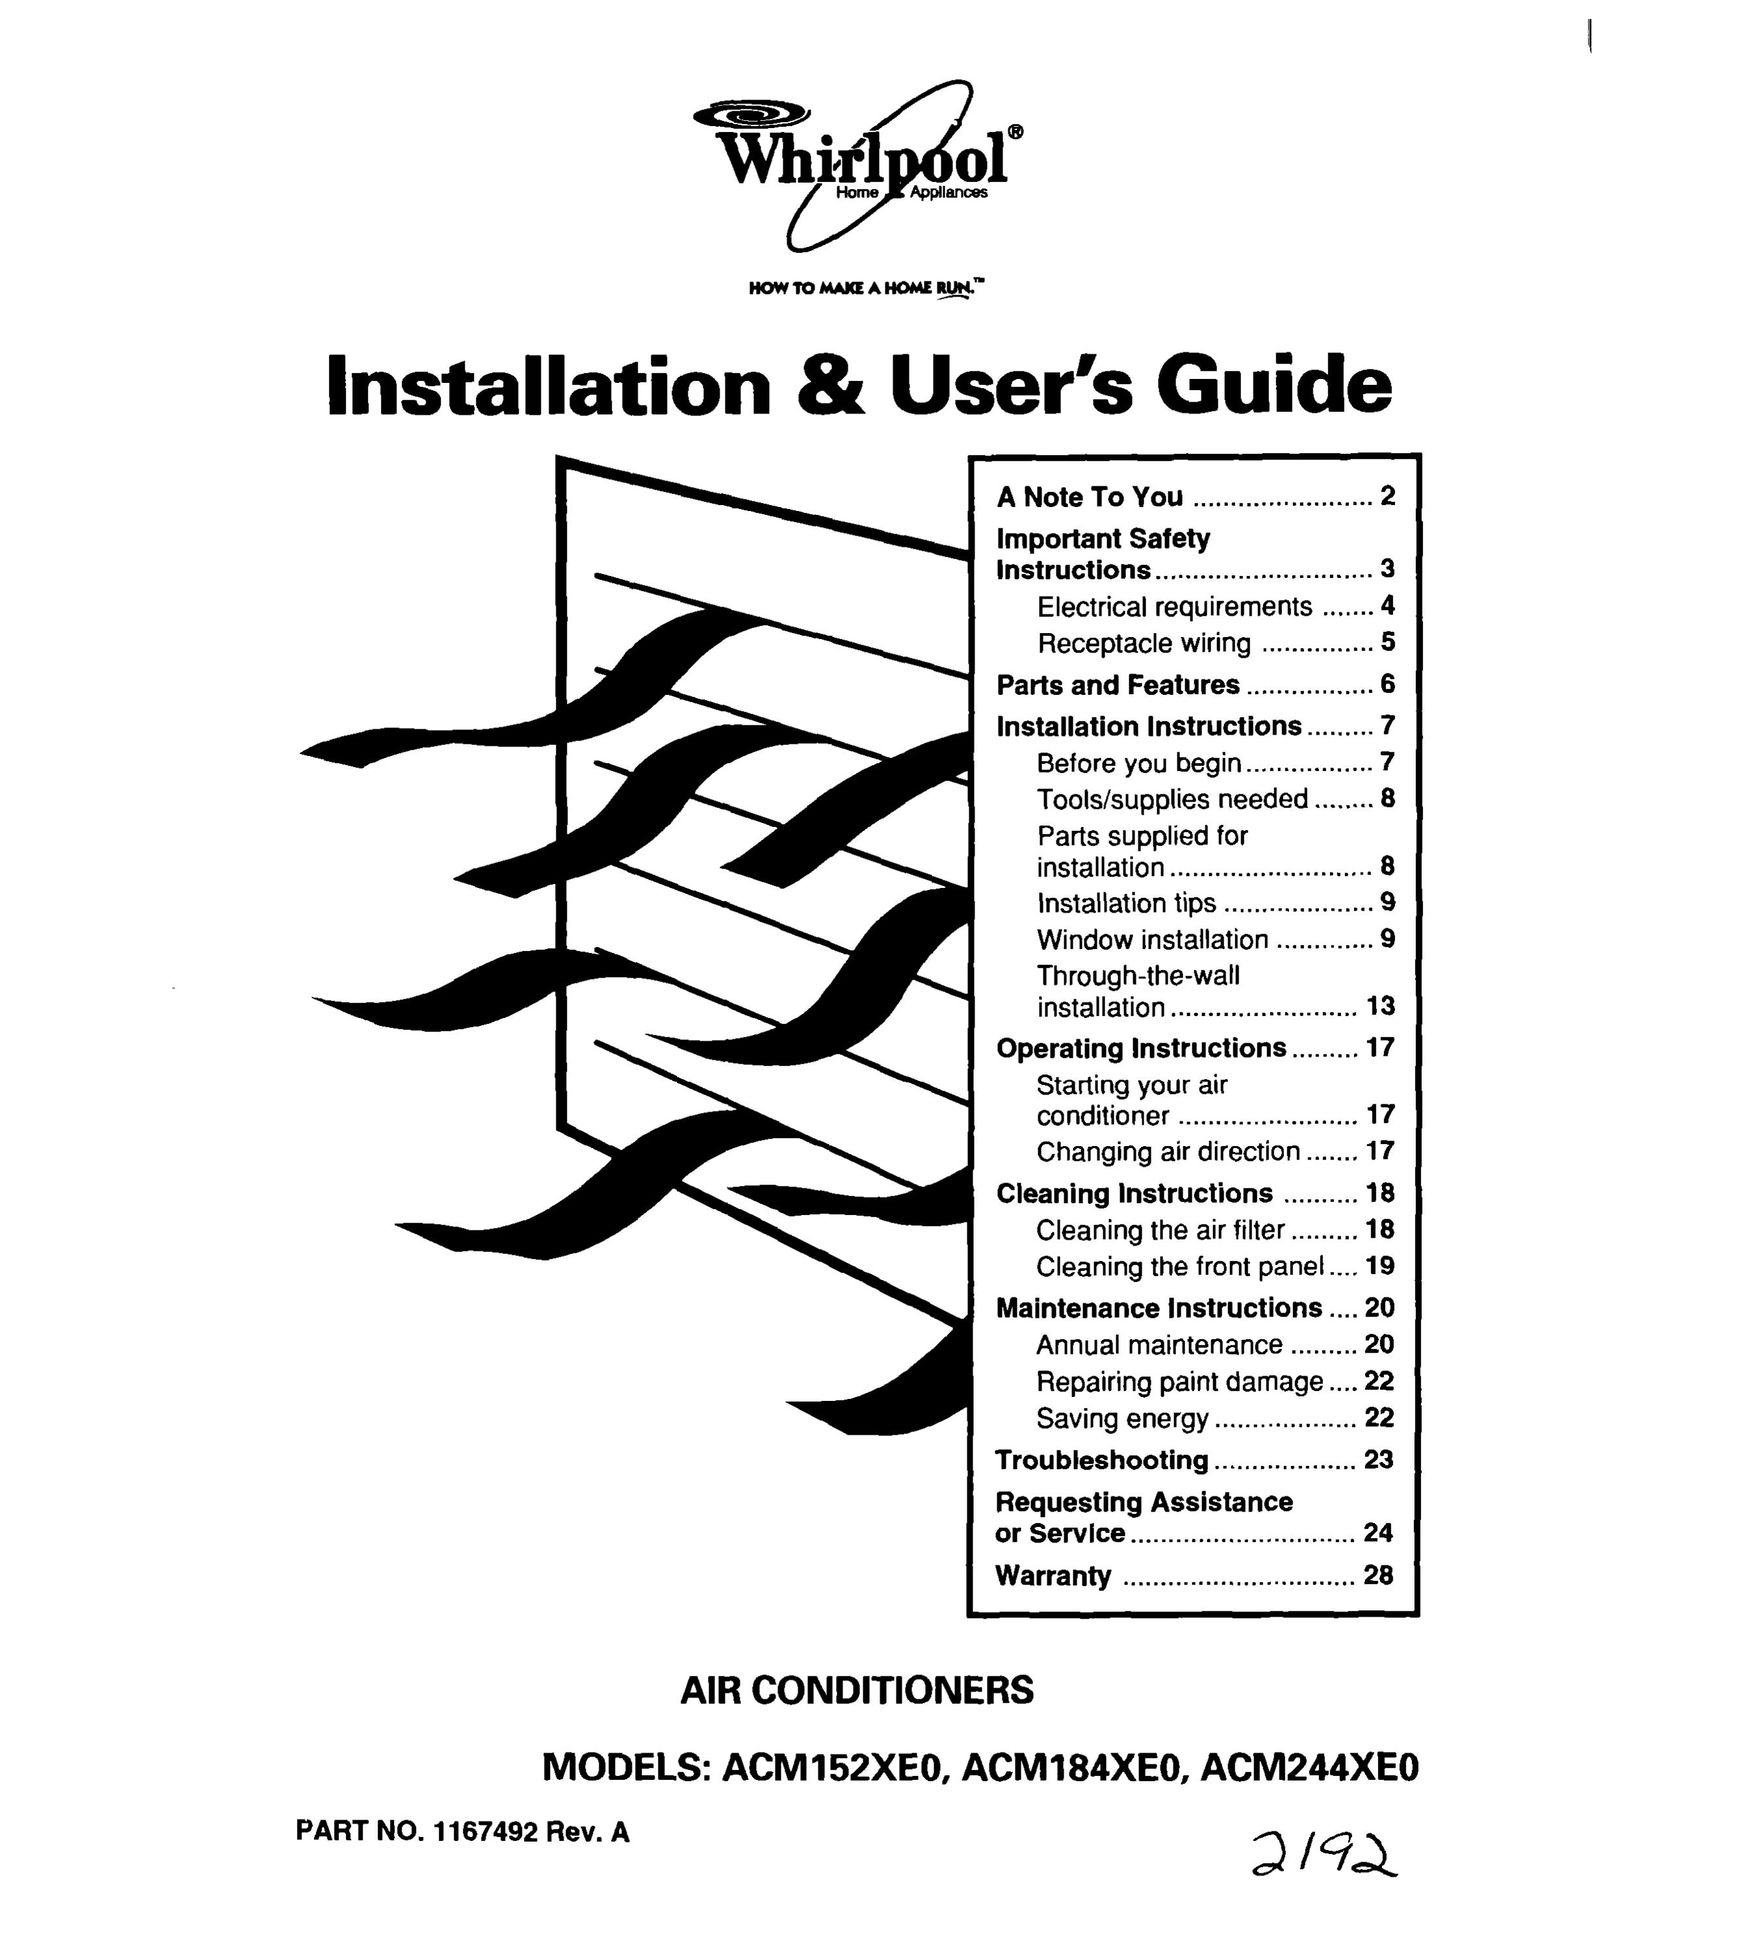 Whirlpool ACM 152XE0 Air Conditioner User Manual